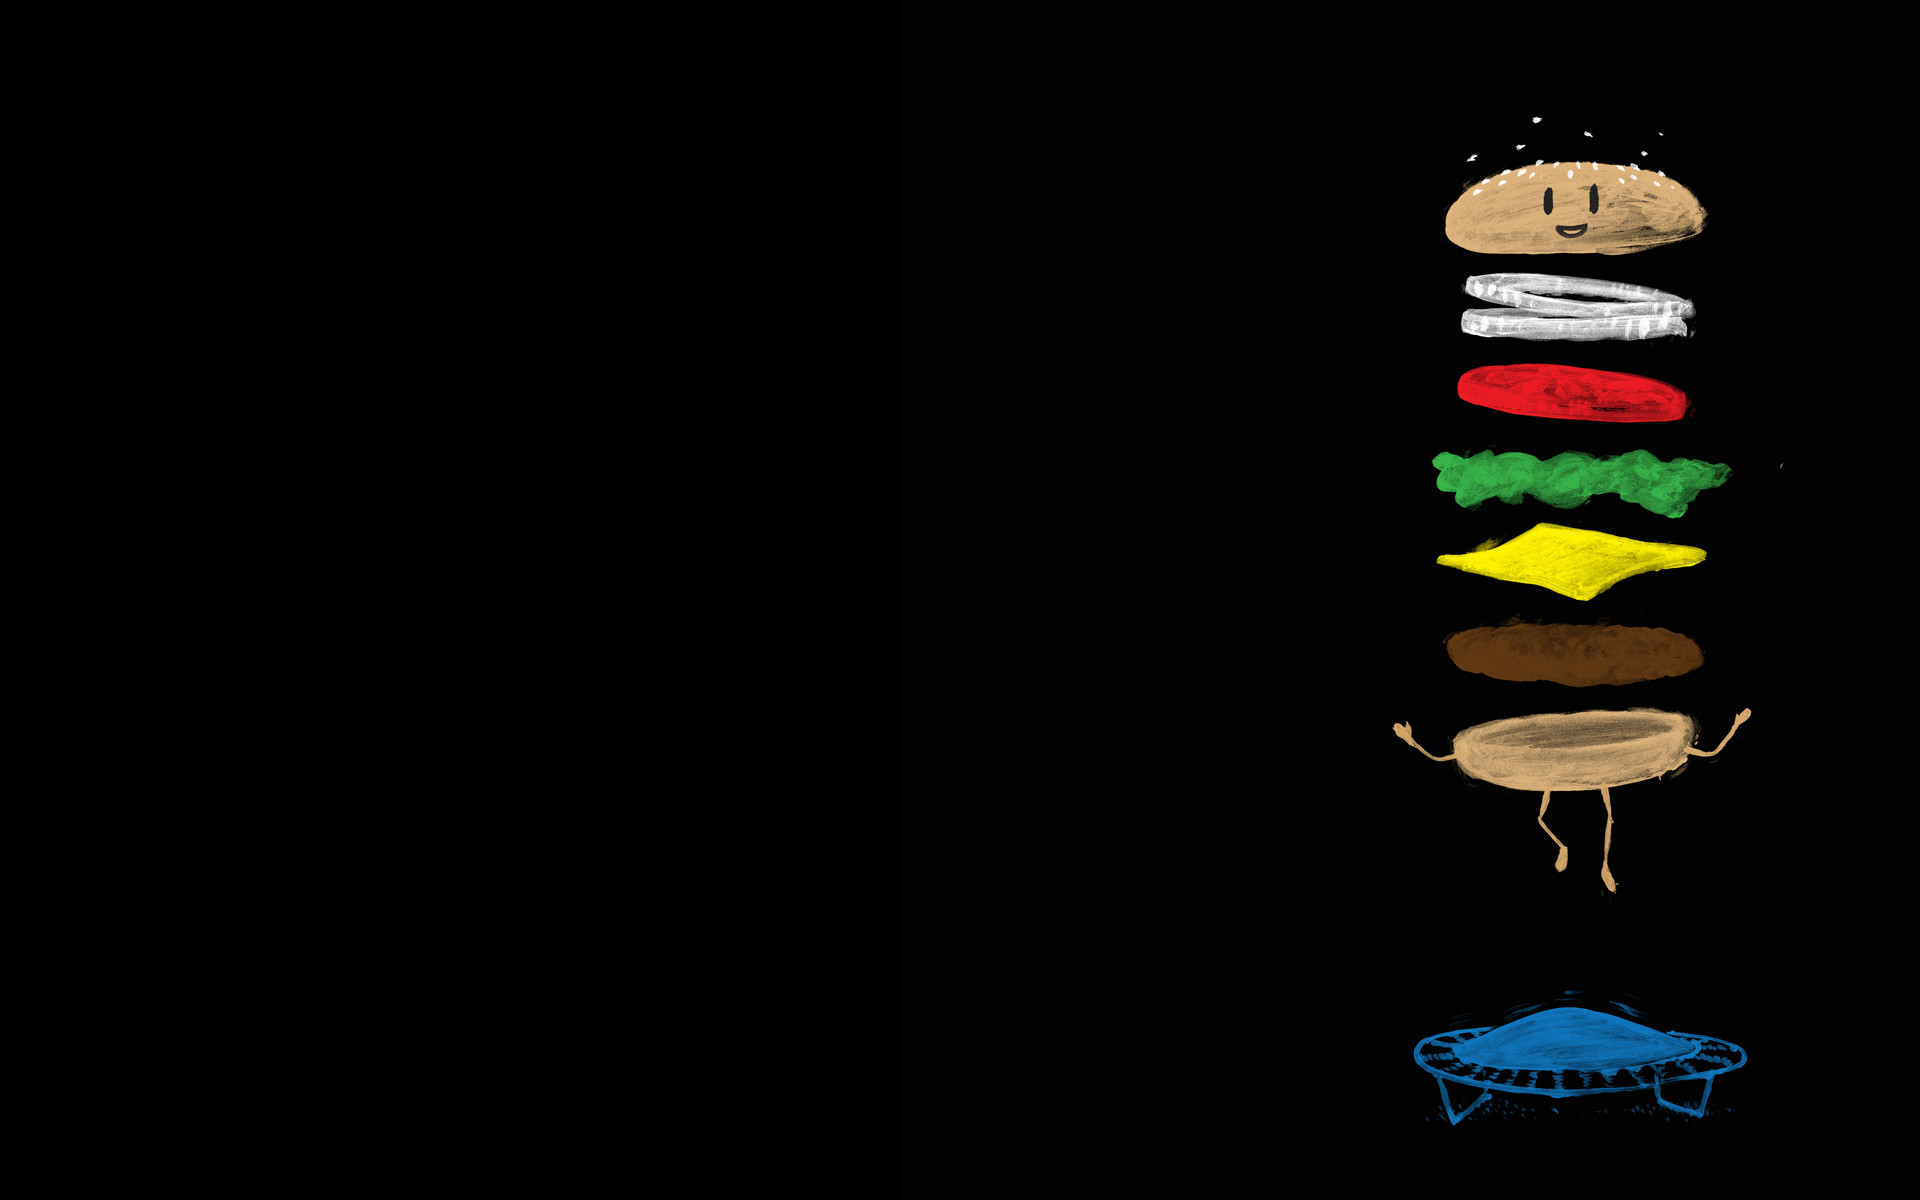 1920x1200 Jumping Hamburger Backgrounds for Powerpoint Presentations, Jumping .